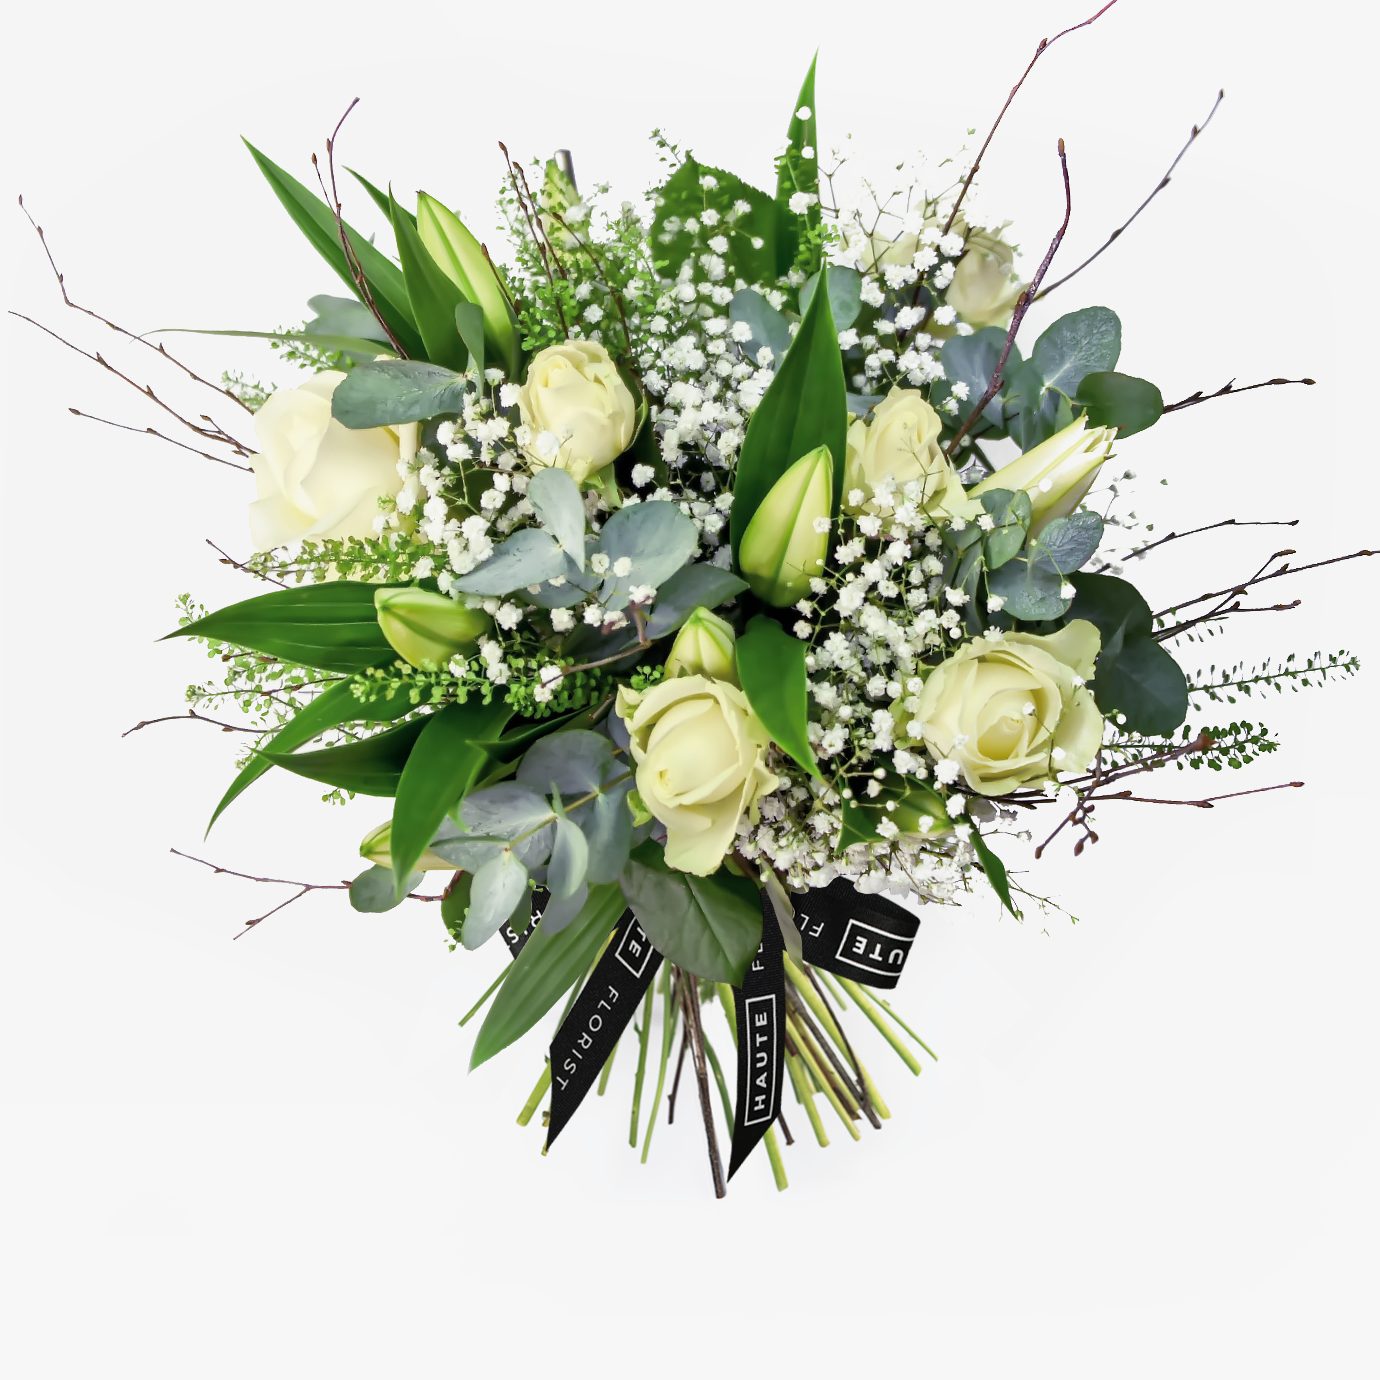  Haute Florist white Avalanche Roses and White Oriental Lilies